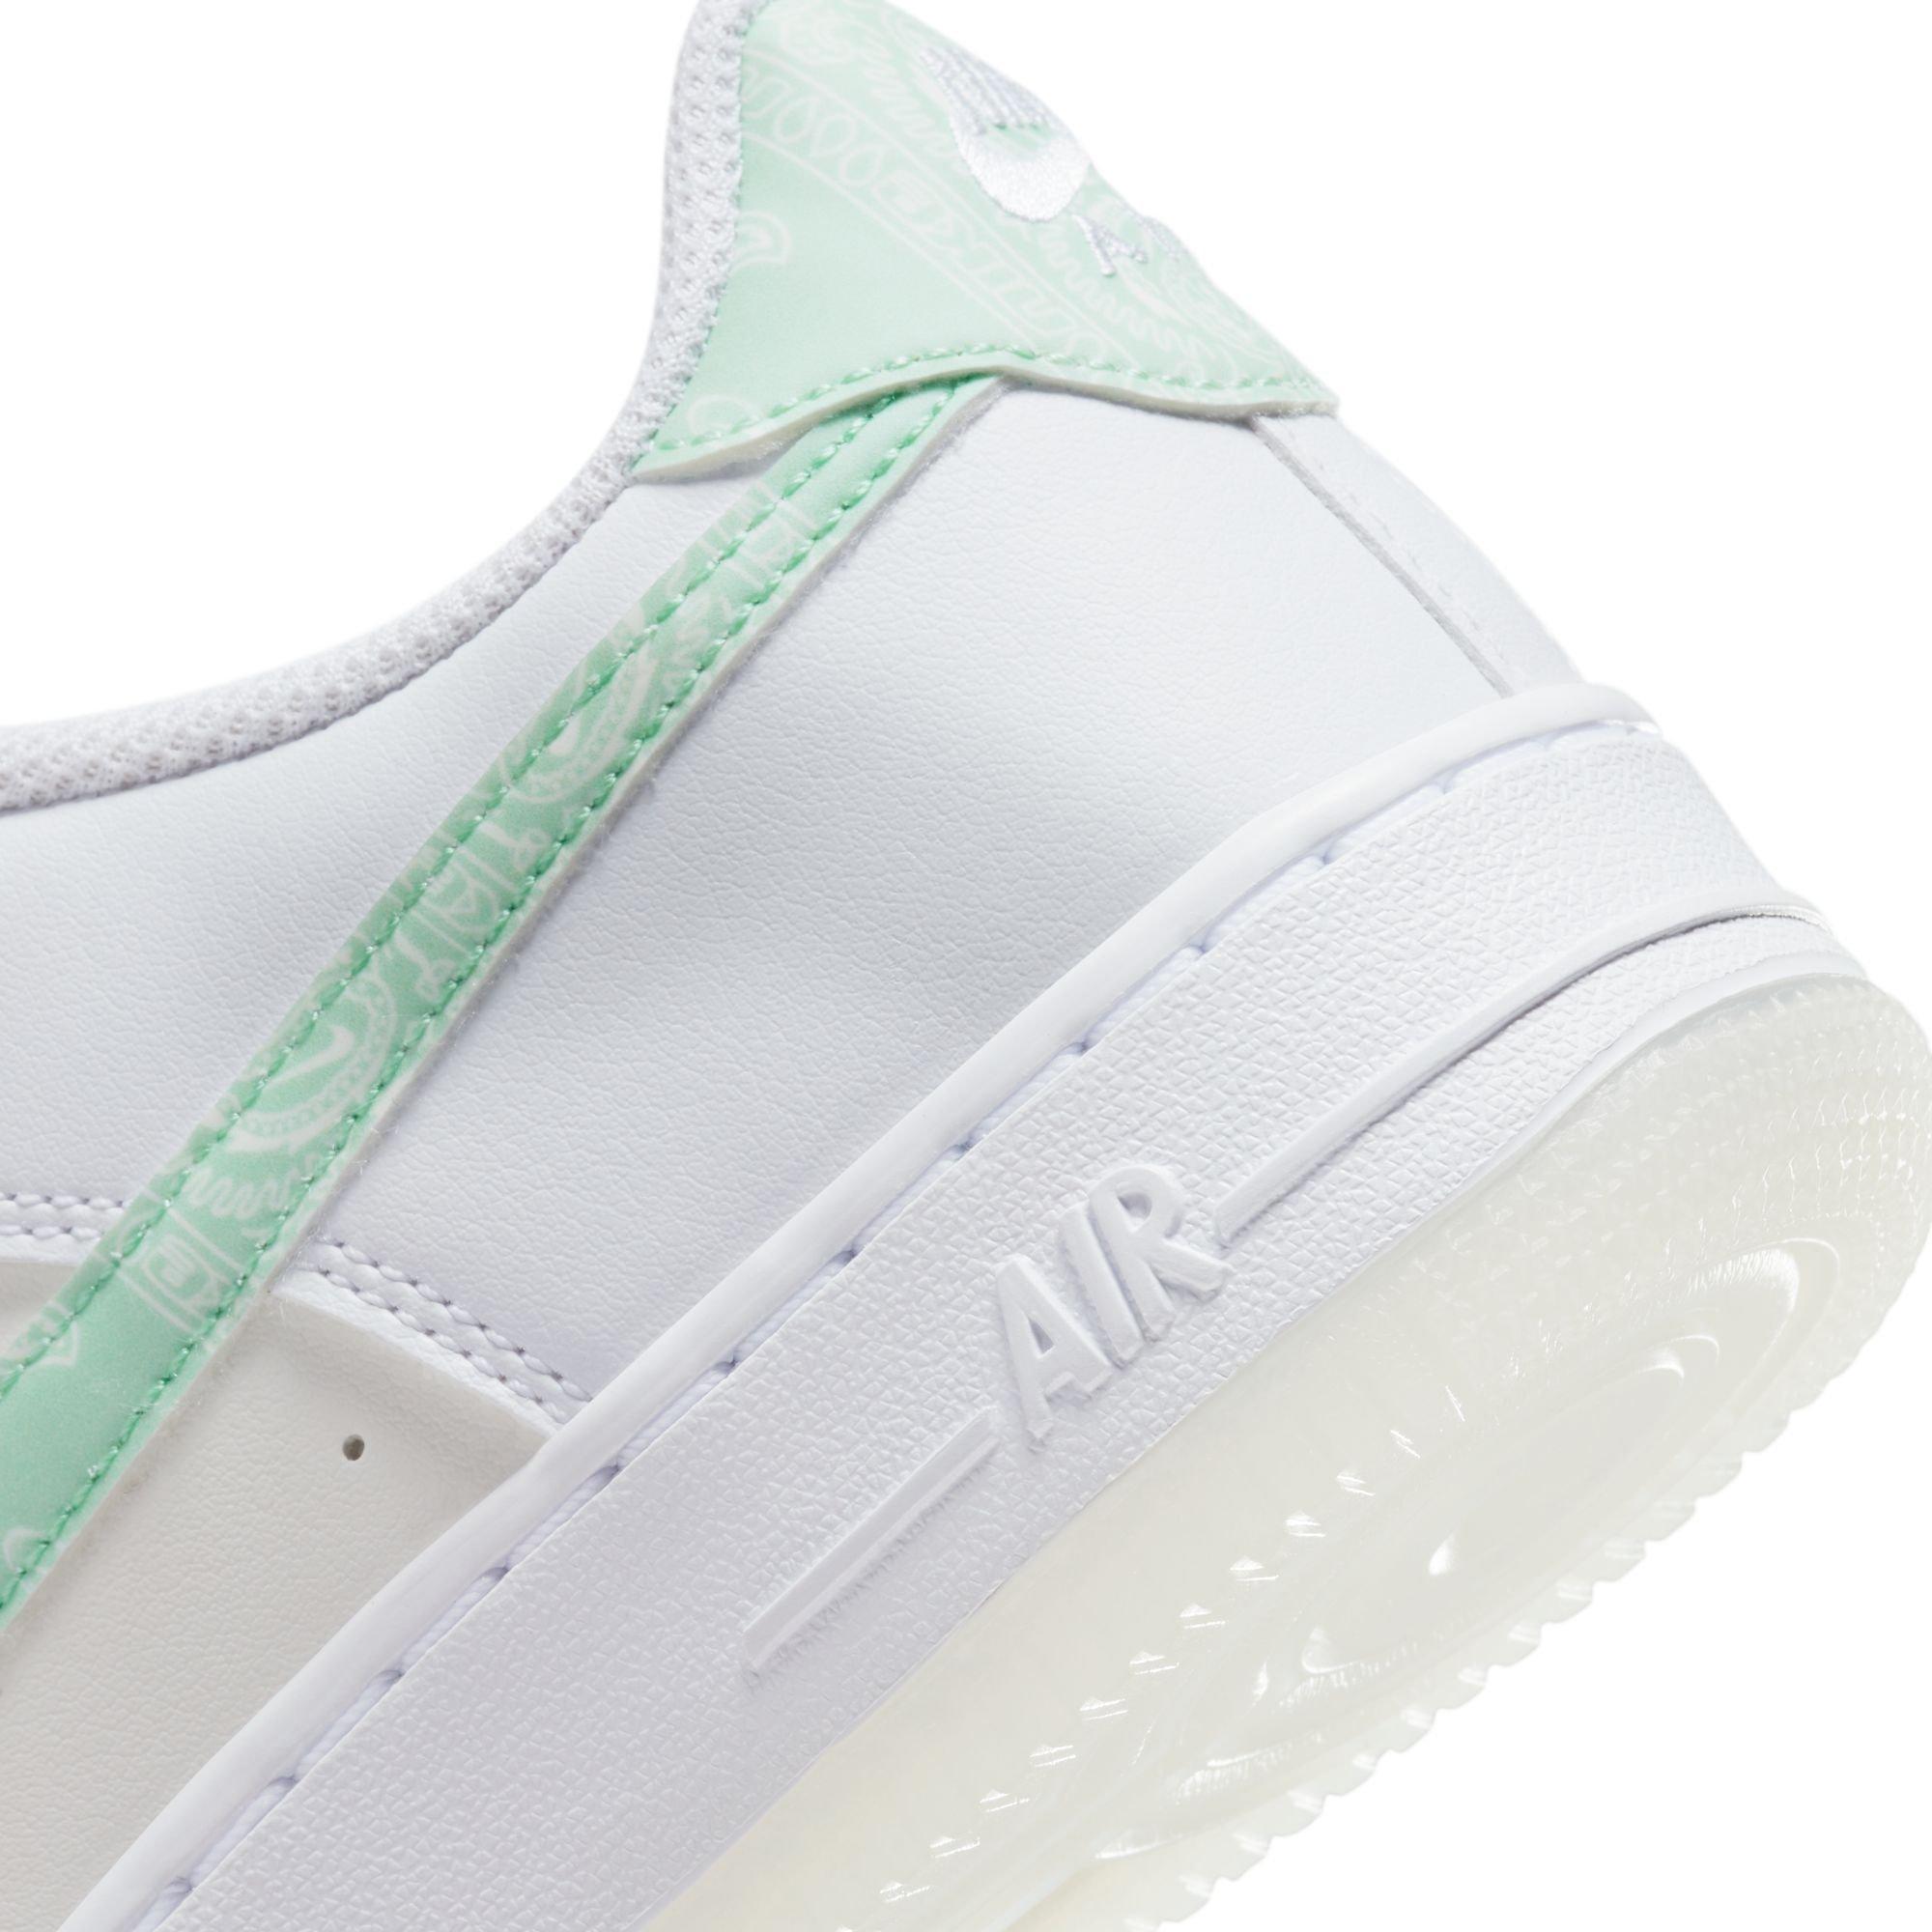 AF 1 LV White – Mint Creations store